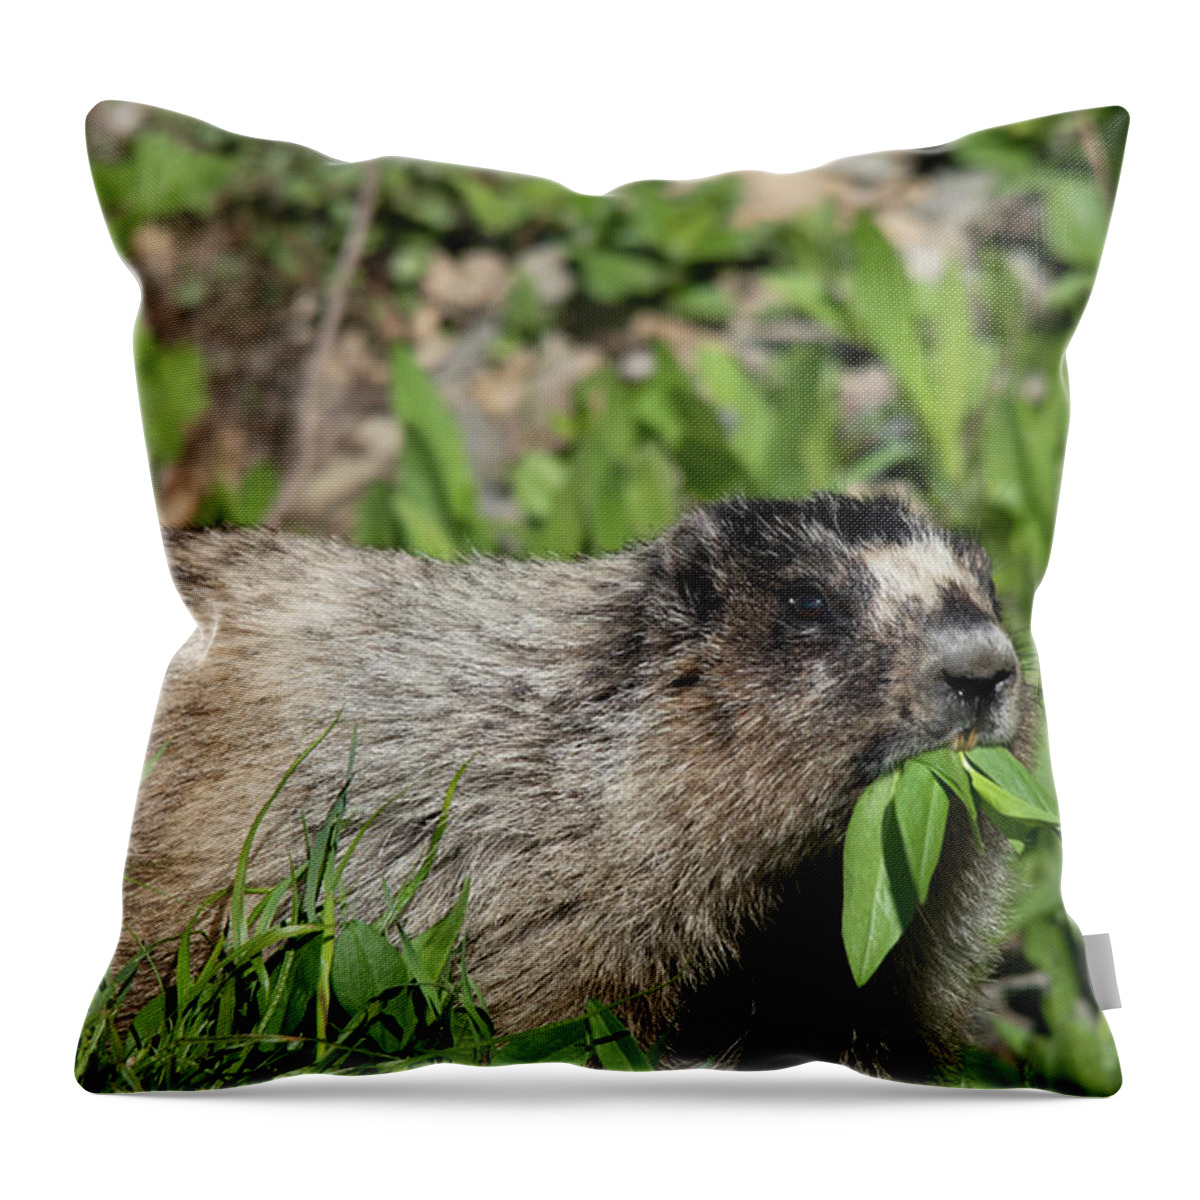 Hoary Marmot Says Yummy Food To Eat! Throw Pillow featuring the photograph Hoary Marmot says yummy food to eat by Carolyn Hall